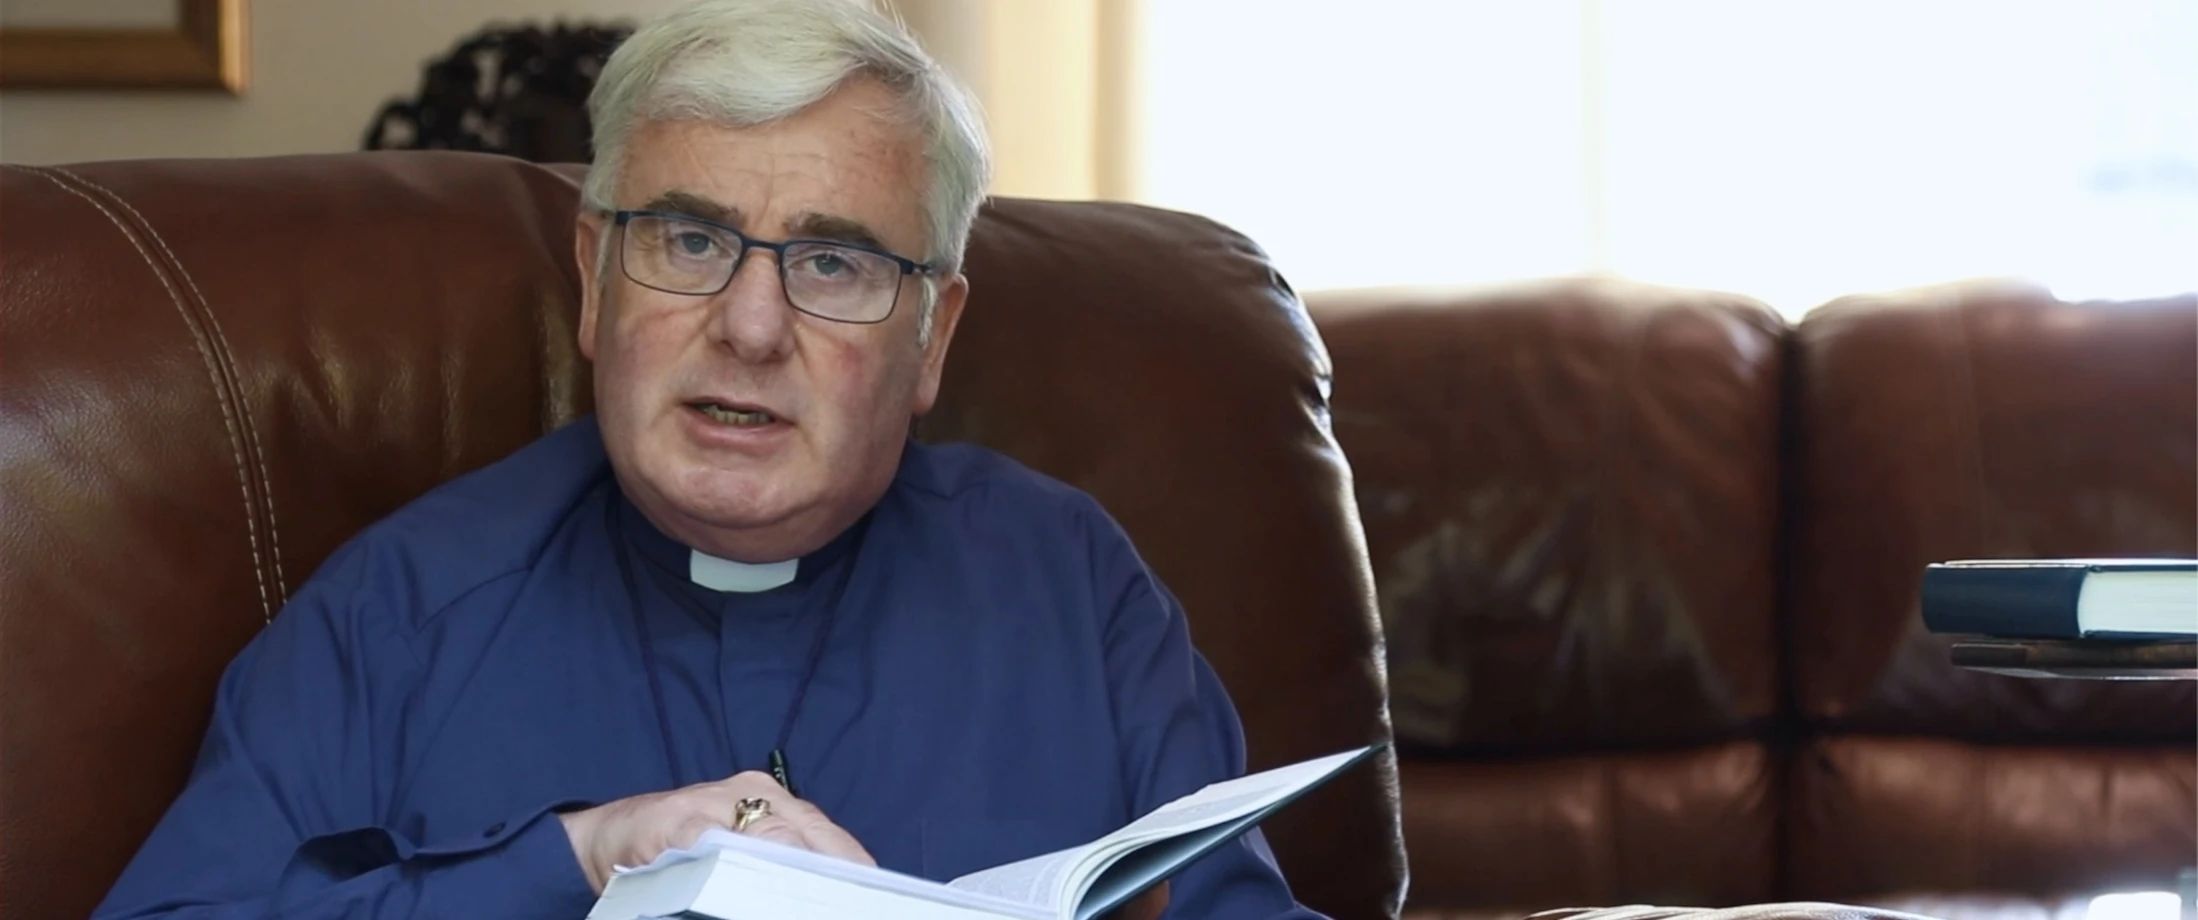 Bishop David writes to the diocese at critical point in pandemic